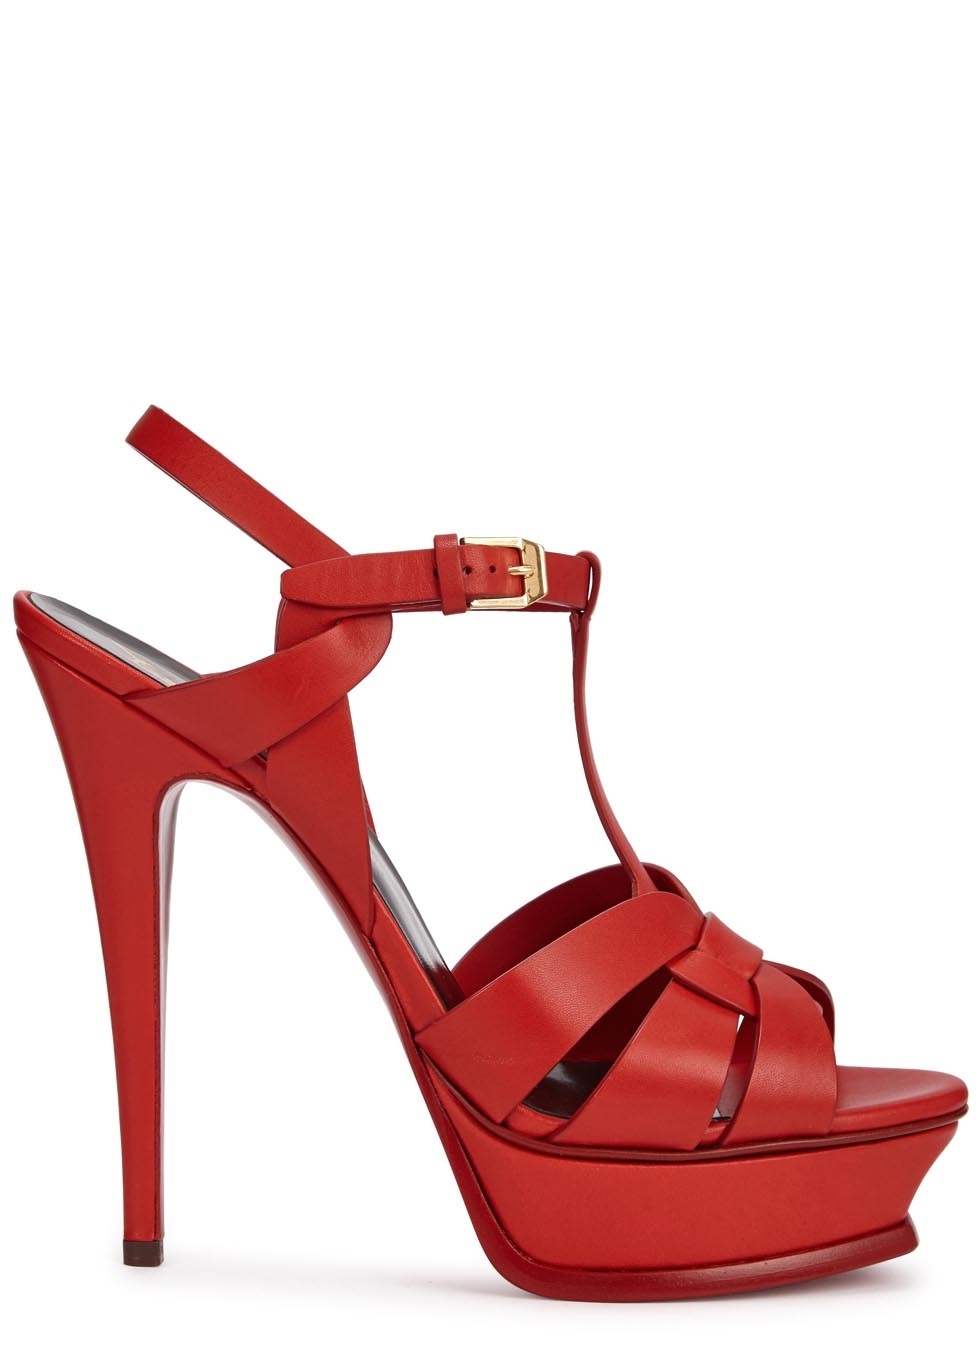 Tribute red leather sandals